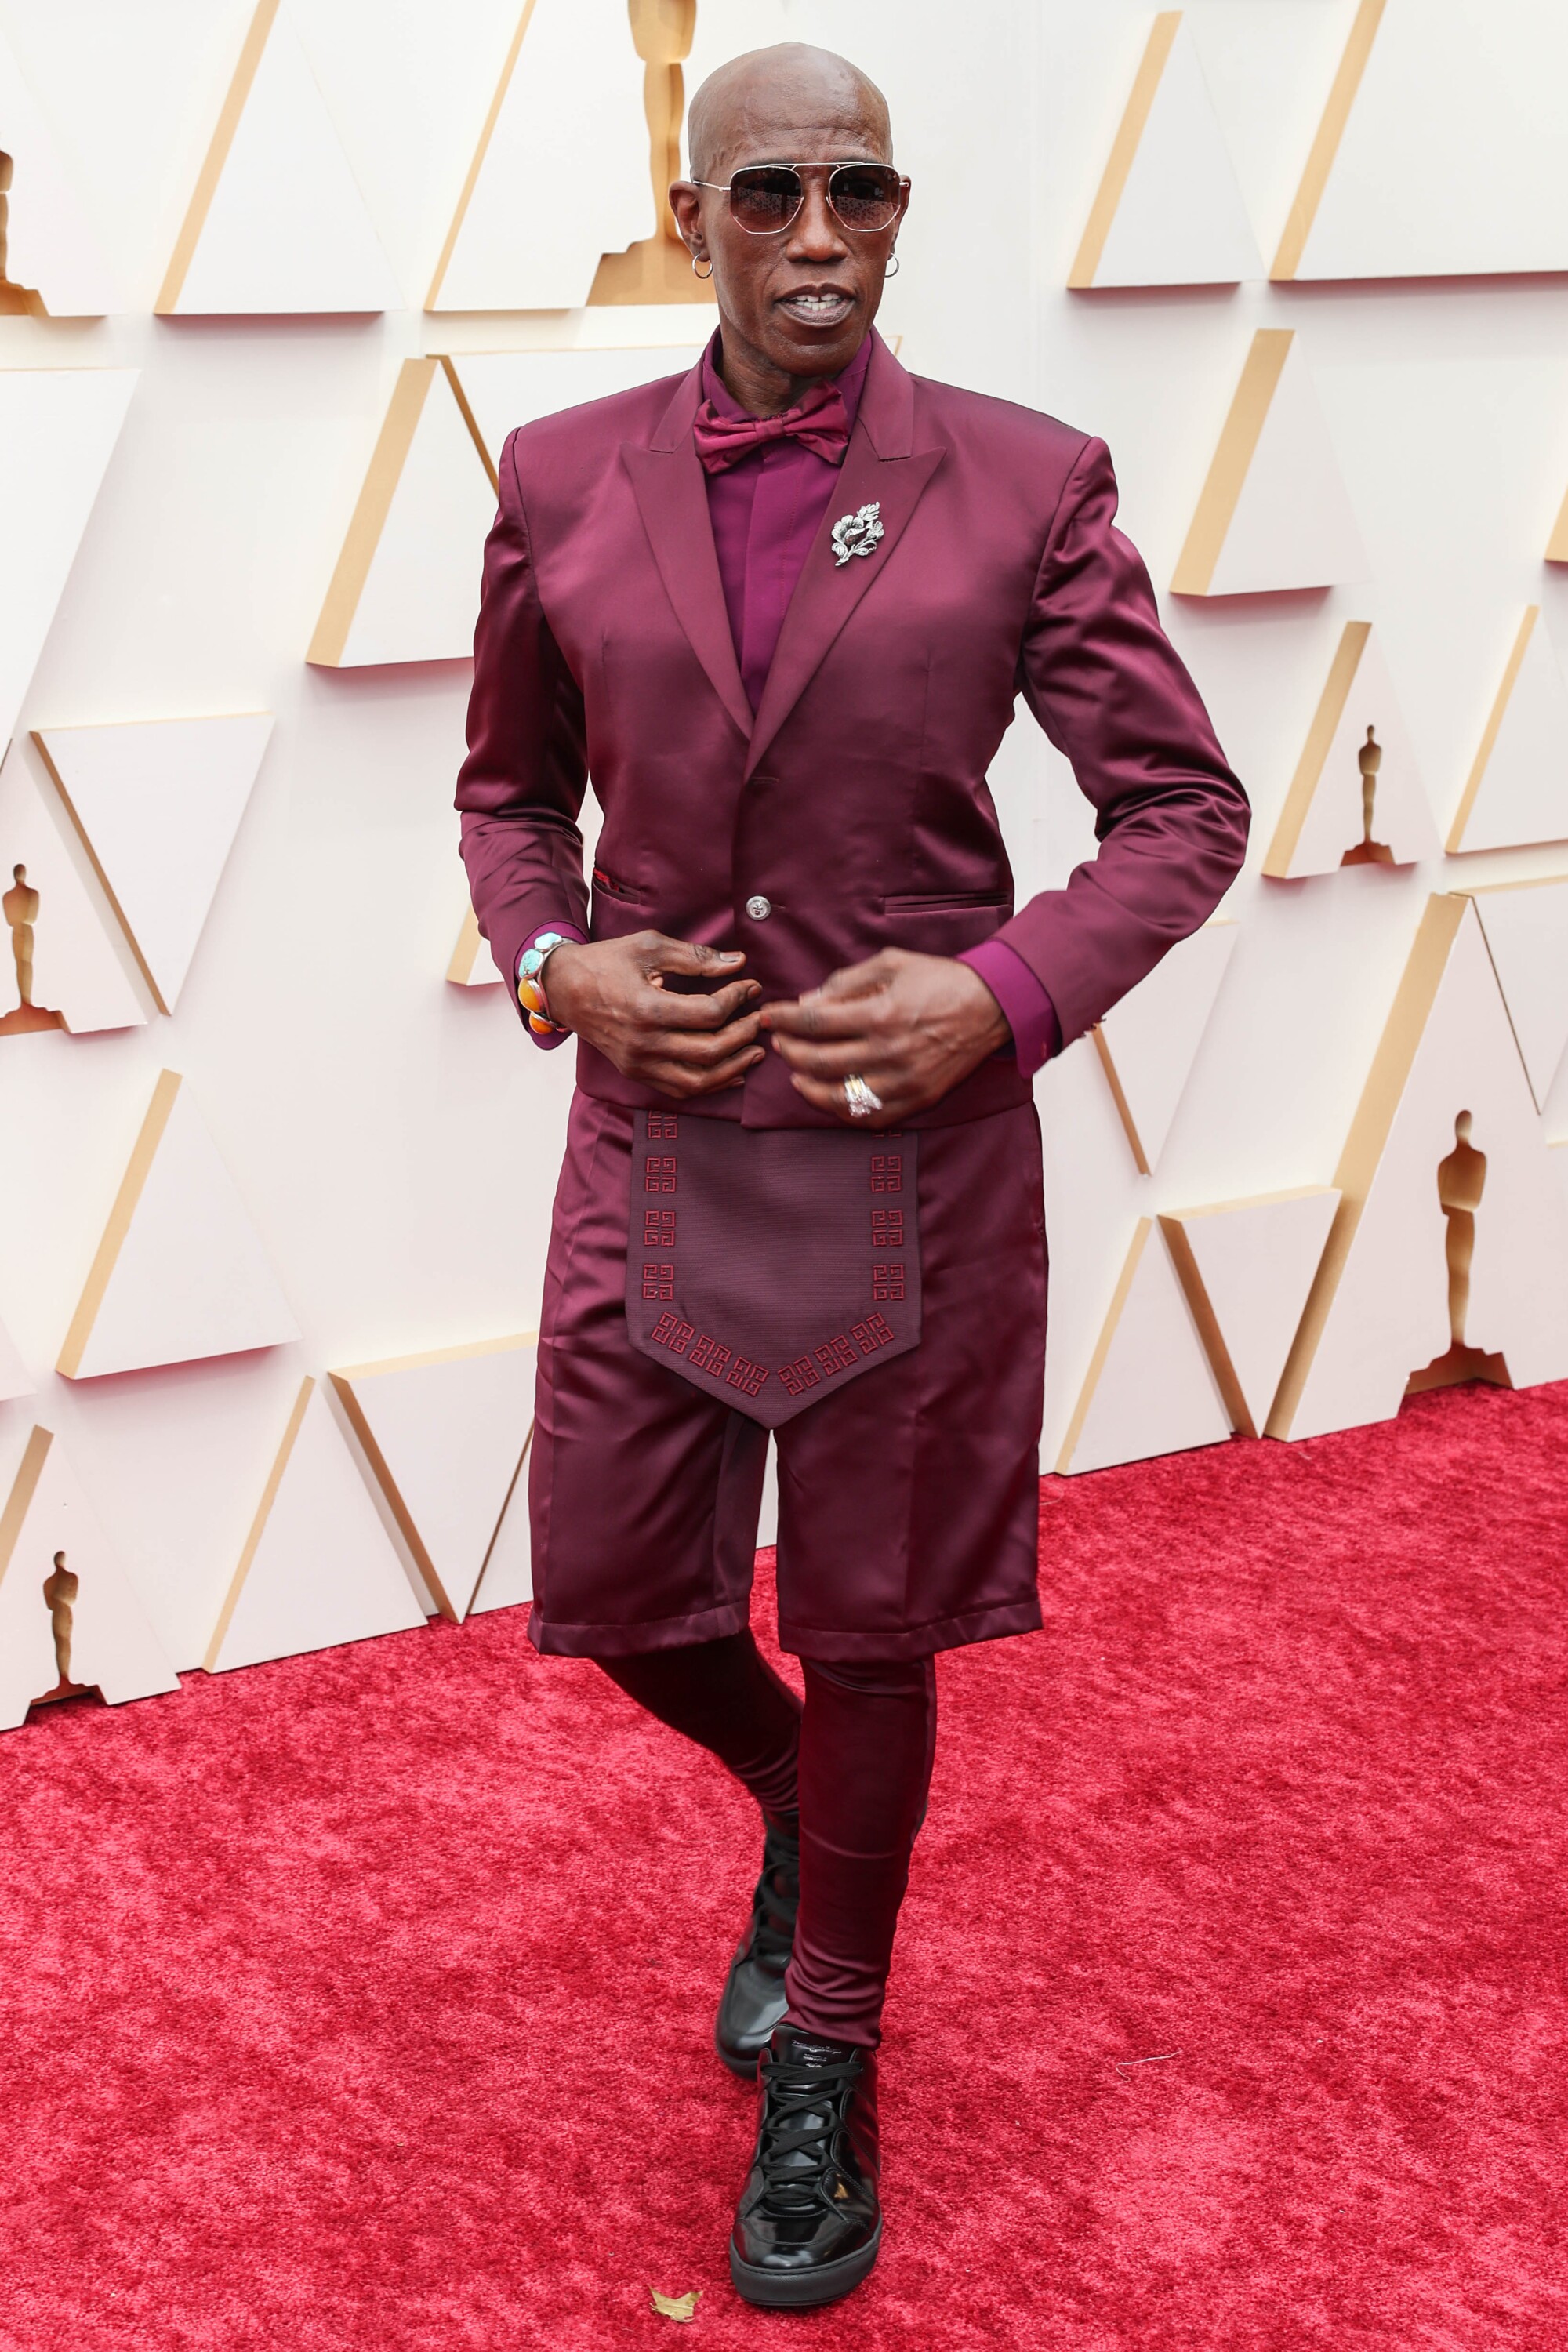 Wesley Snipes attends the 94th Academy Awards at the Dolby Theatre.  (Jay L Clendenin/Los Angeles Times)